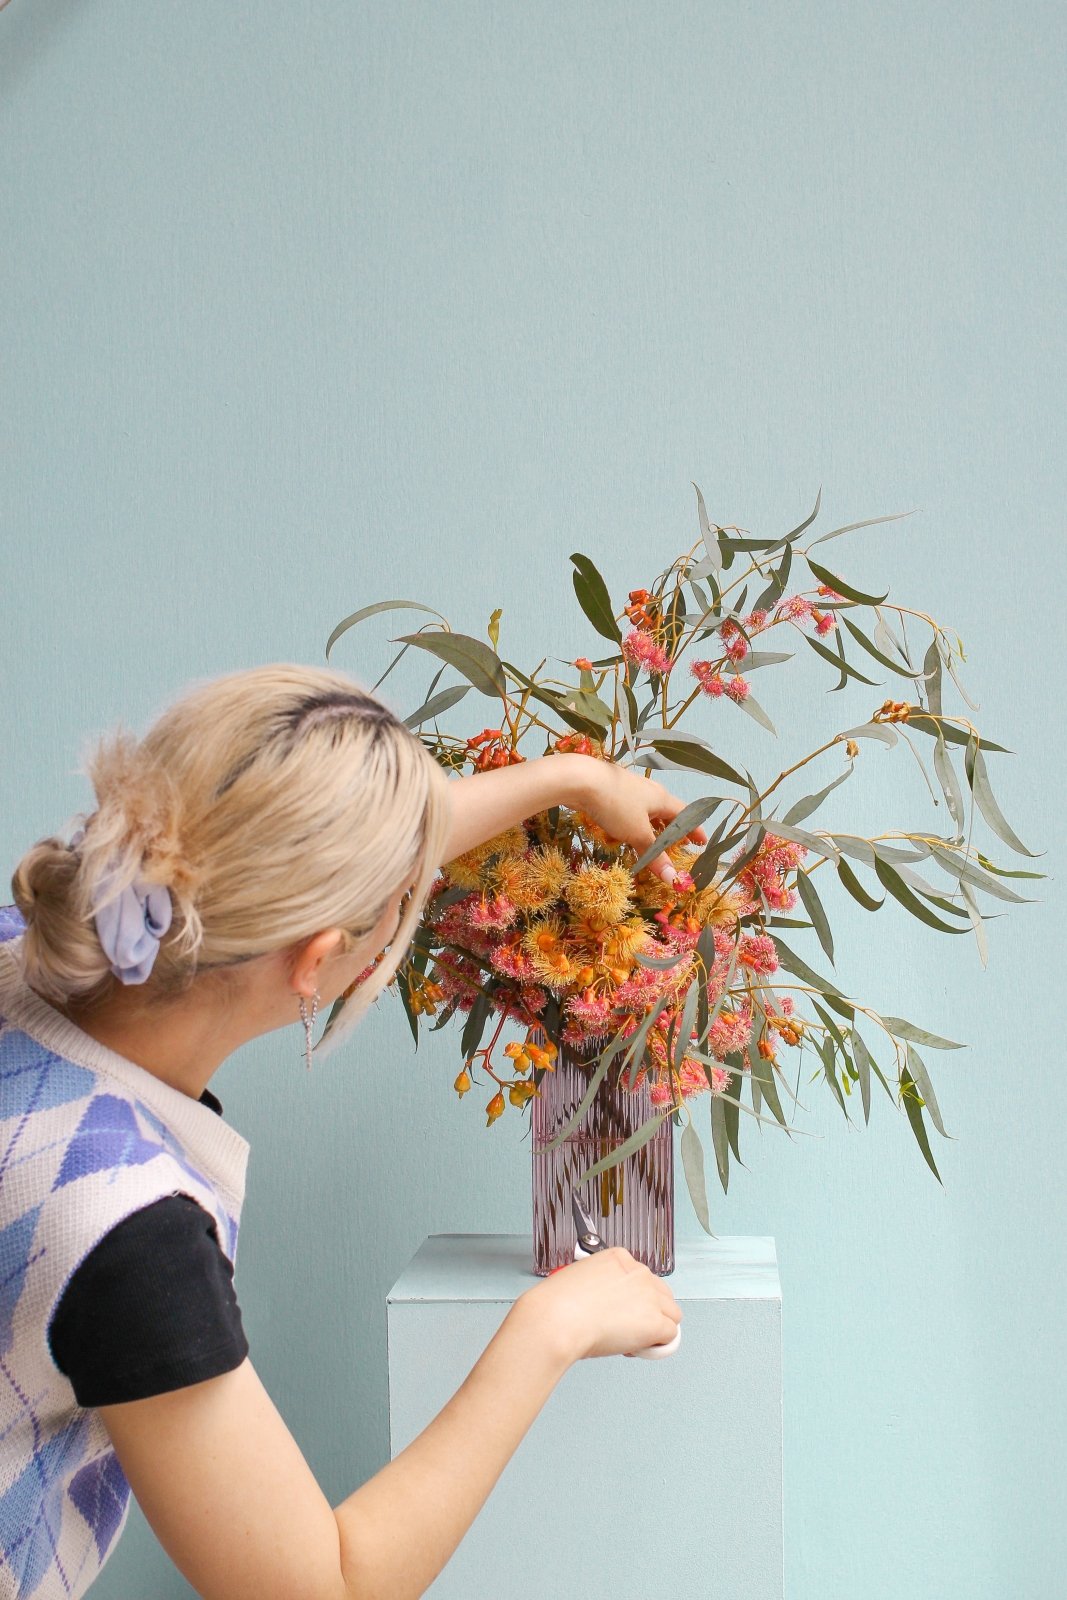 Best Flower Delivery For Melbourne People Who Love Native Flowers!